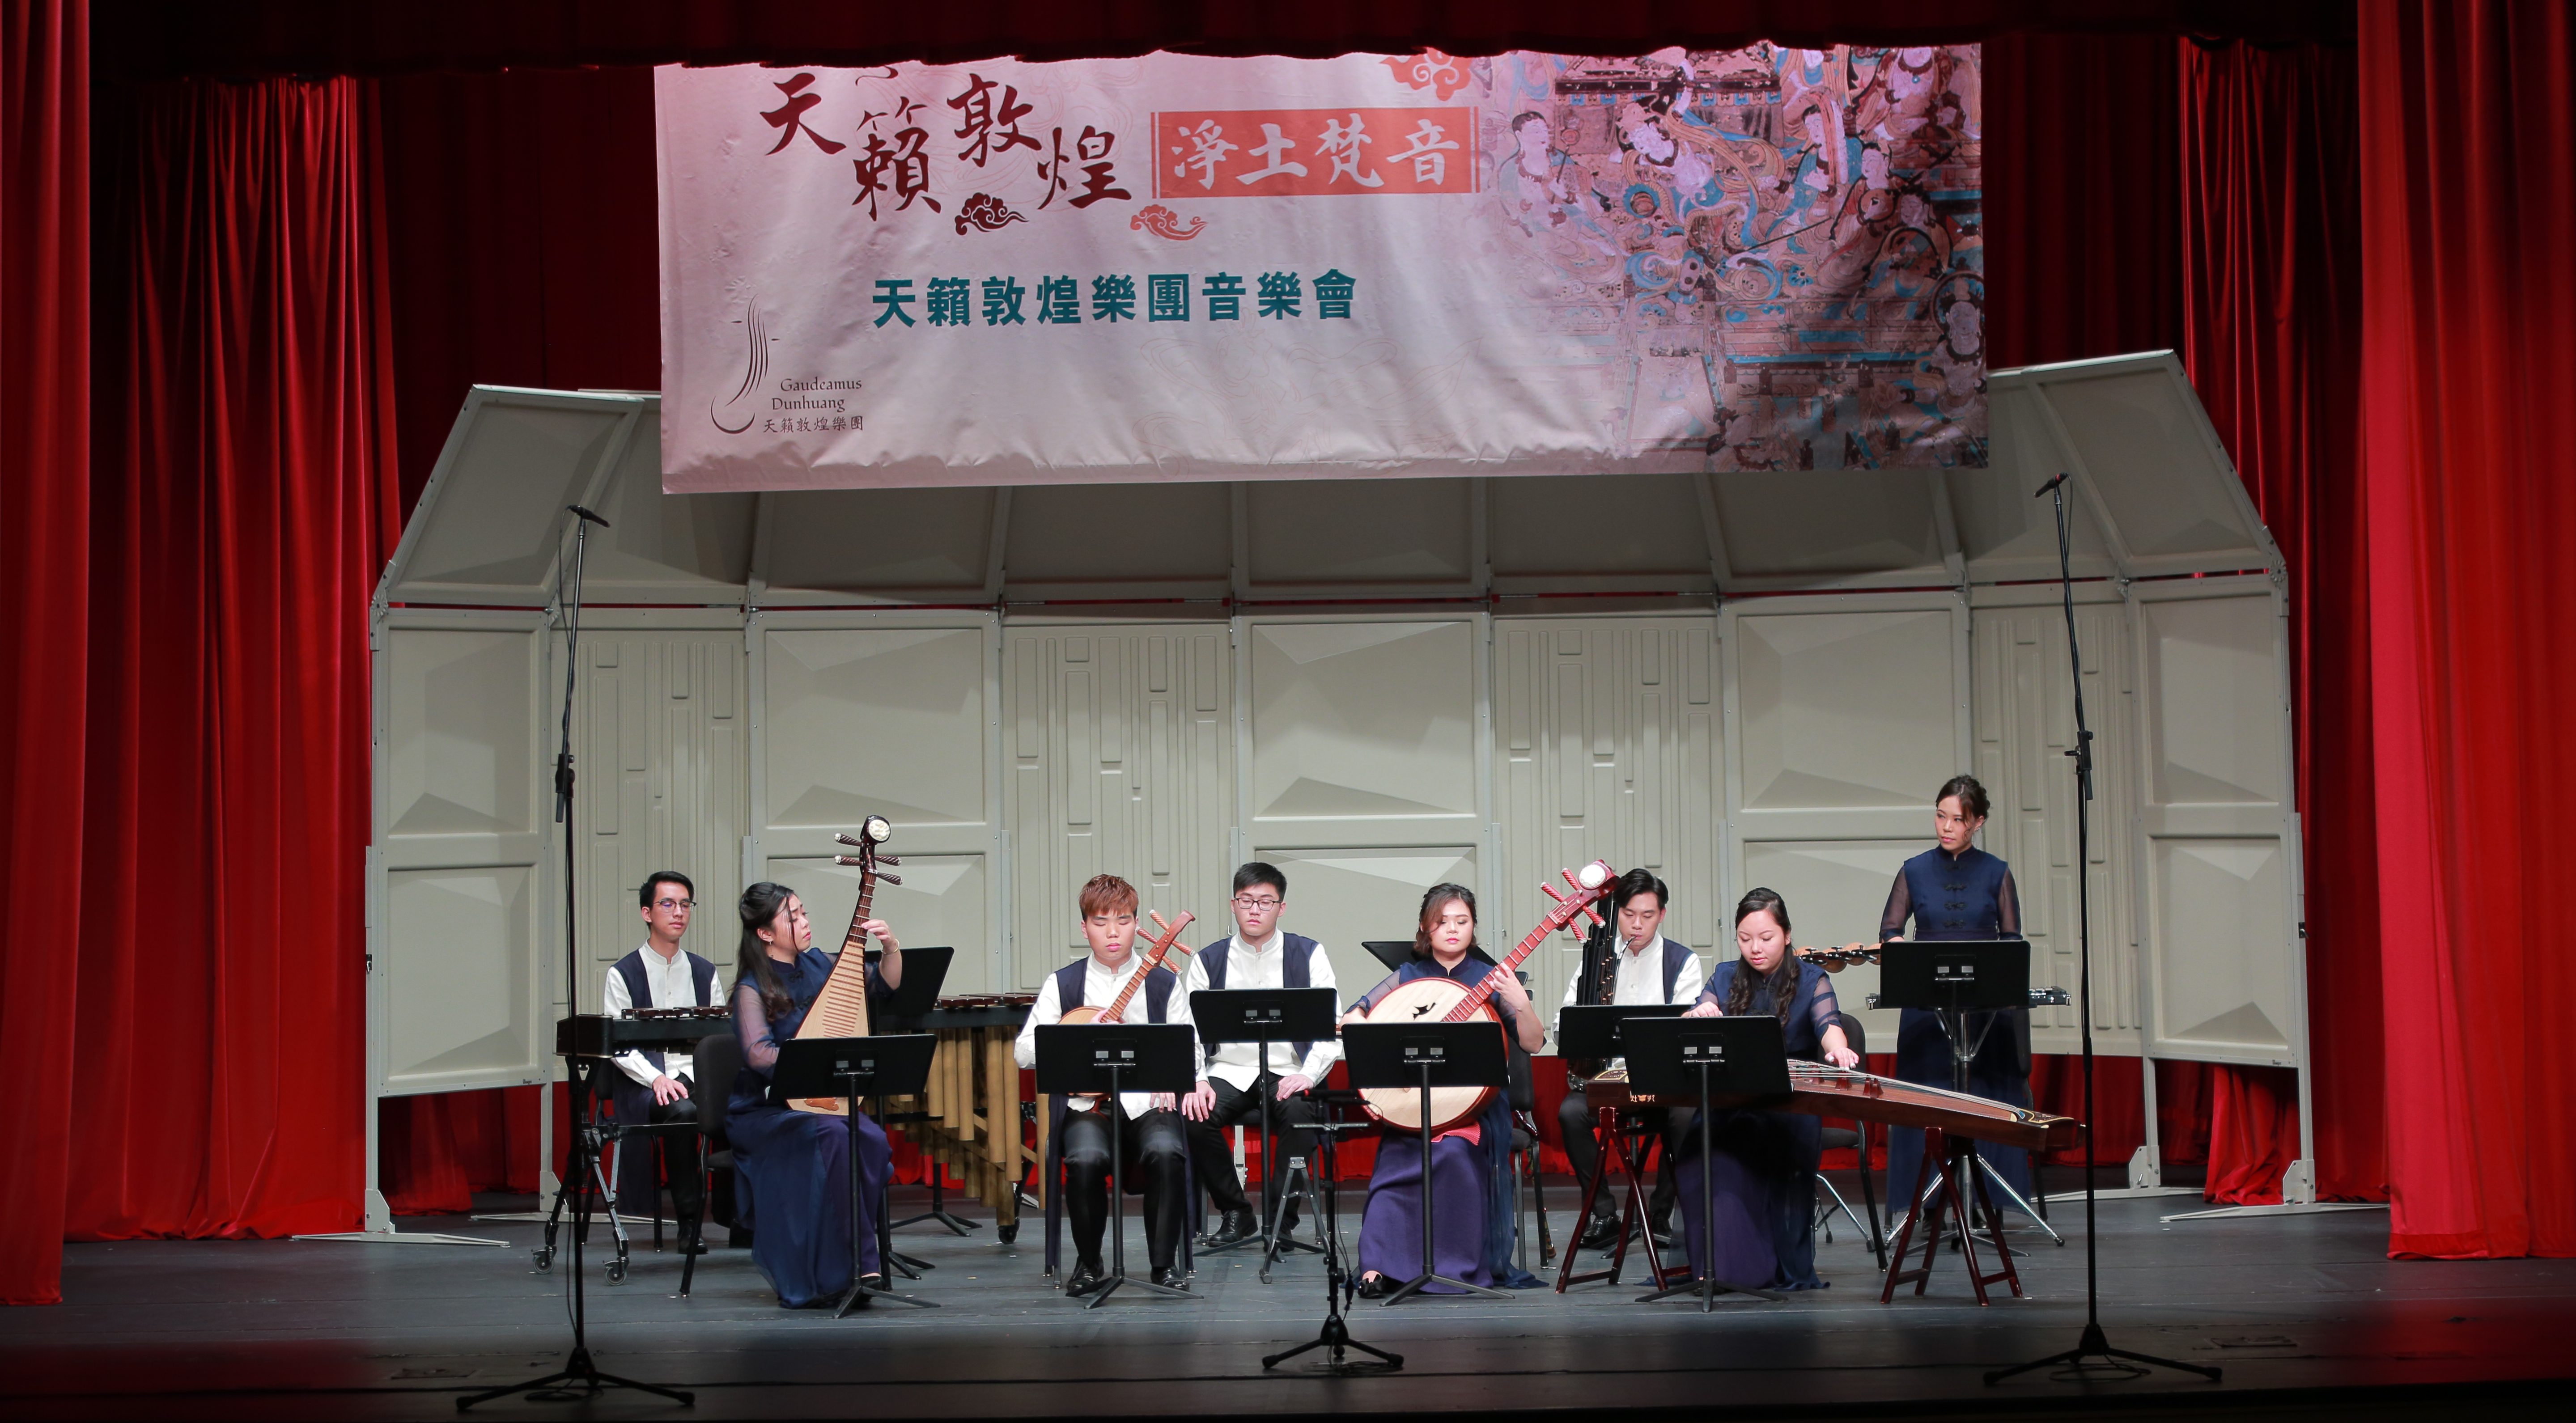 Gaudeamus Dunhuang: the Heavenly Music of Dunhuang